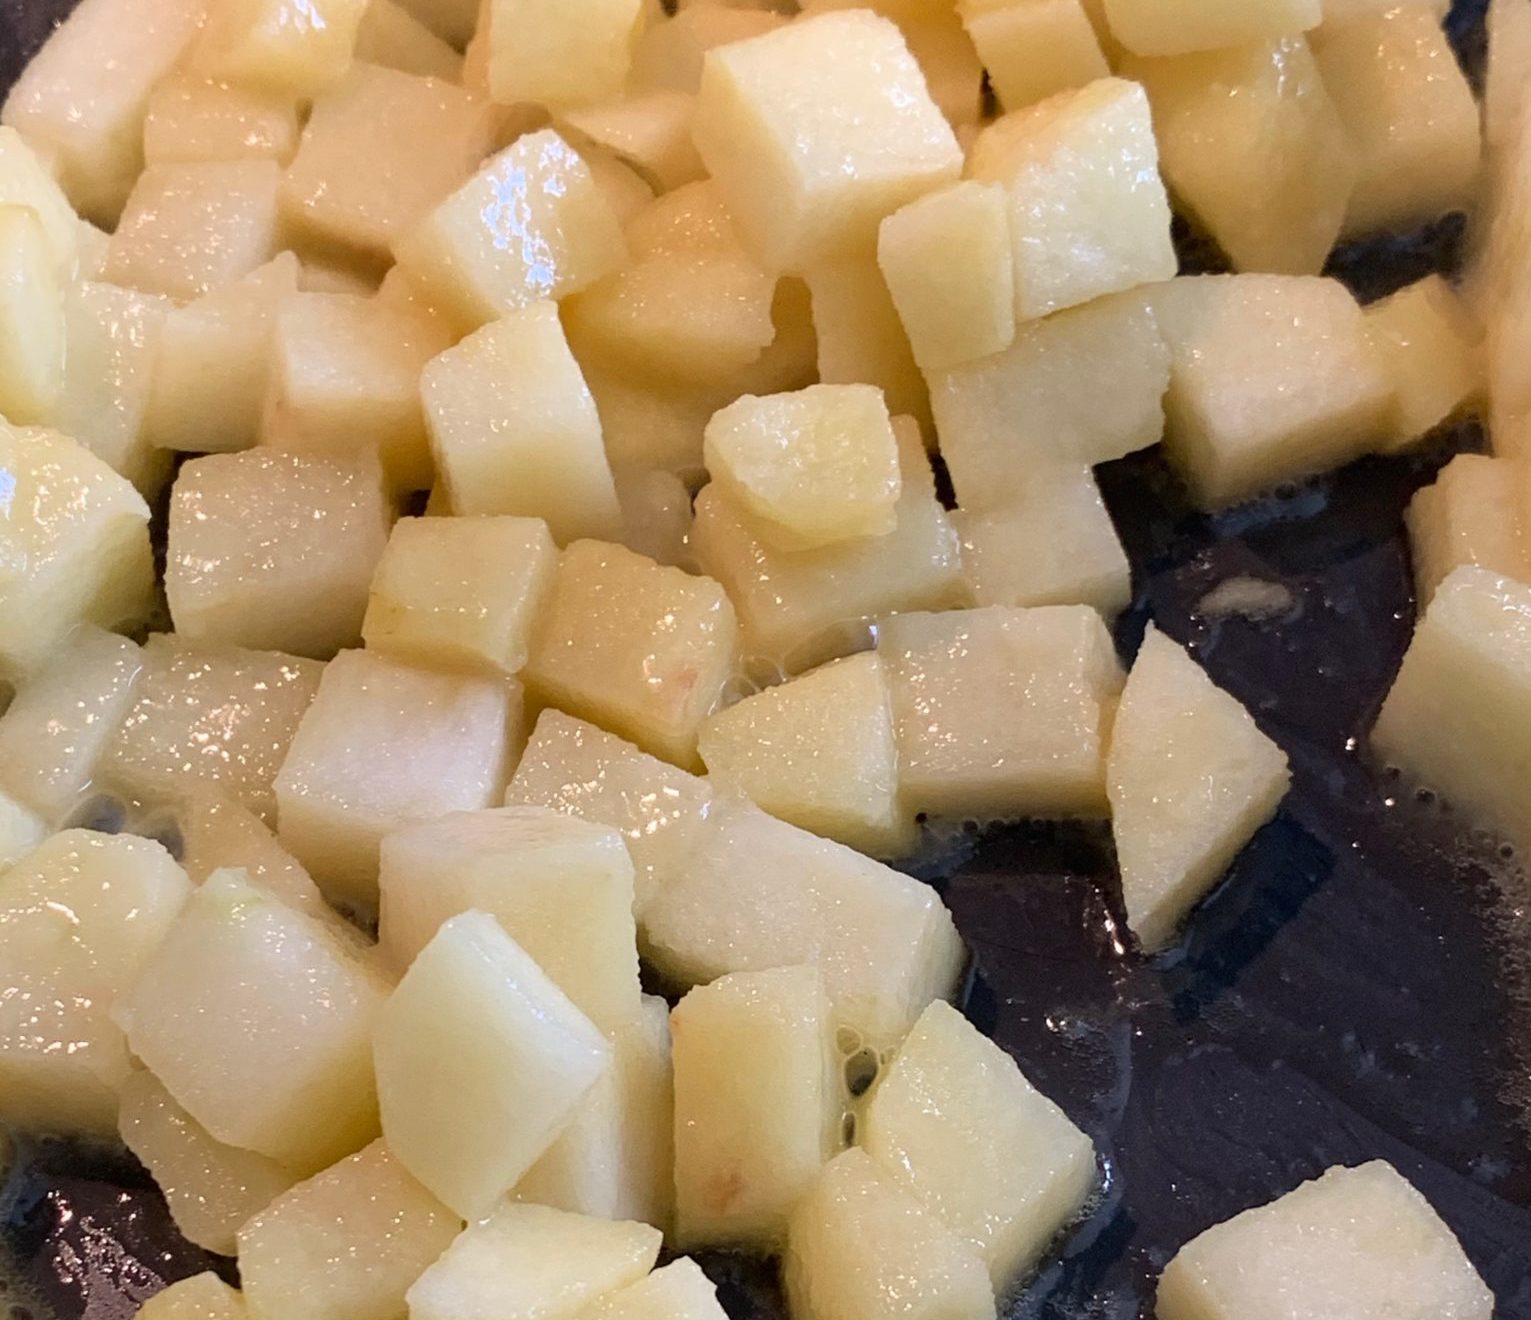 Diced apples in butter